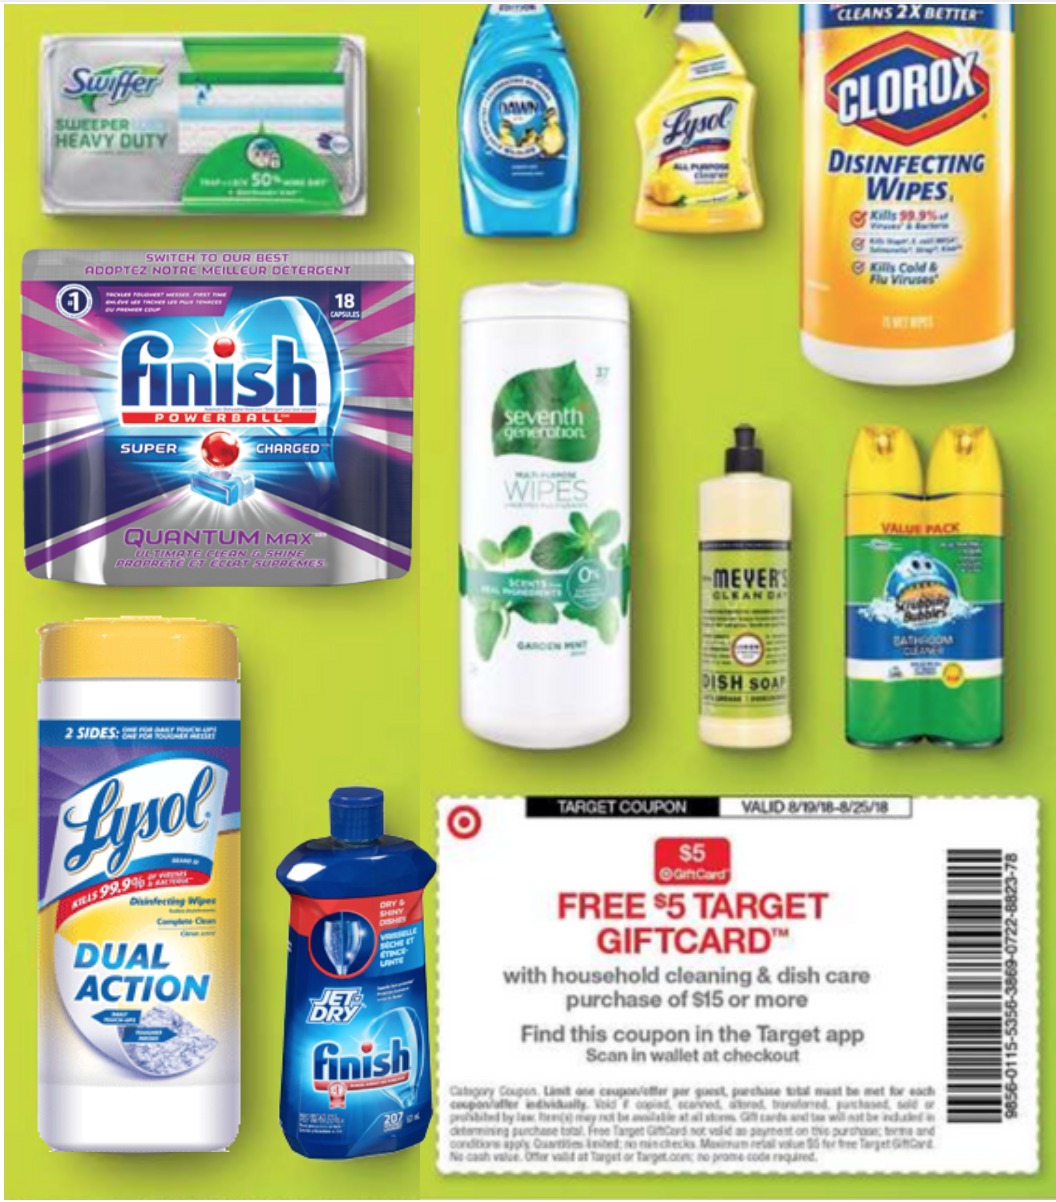 https://www.southernsavers.com/wp-content/uploads/2018/08/target-cleaning-coupon.jpg